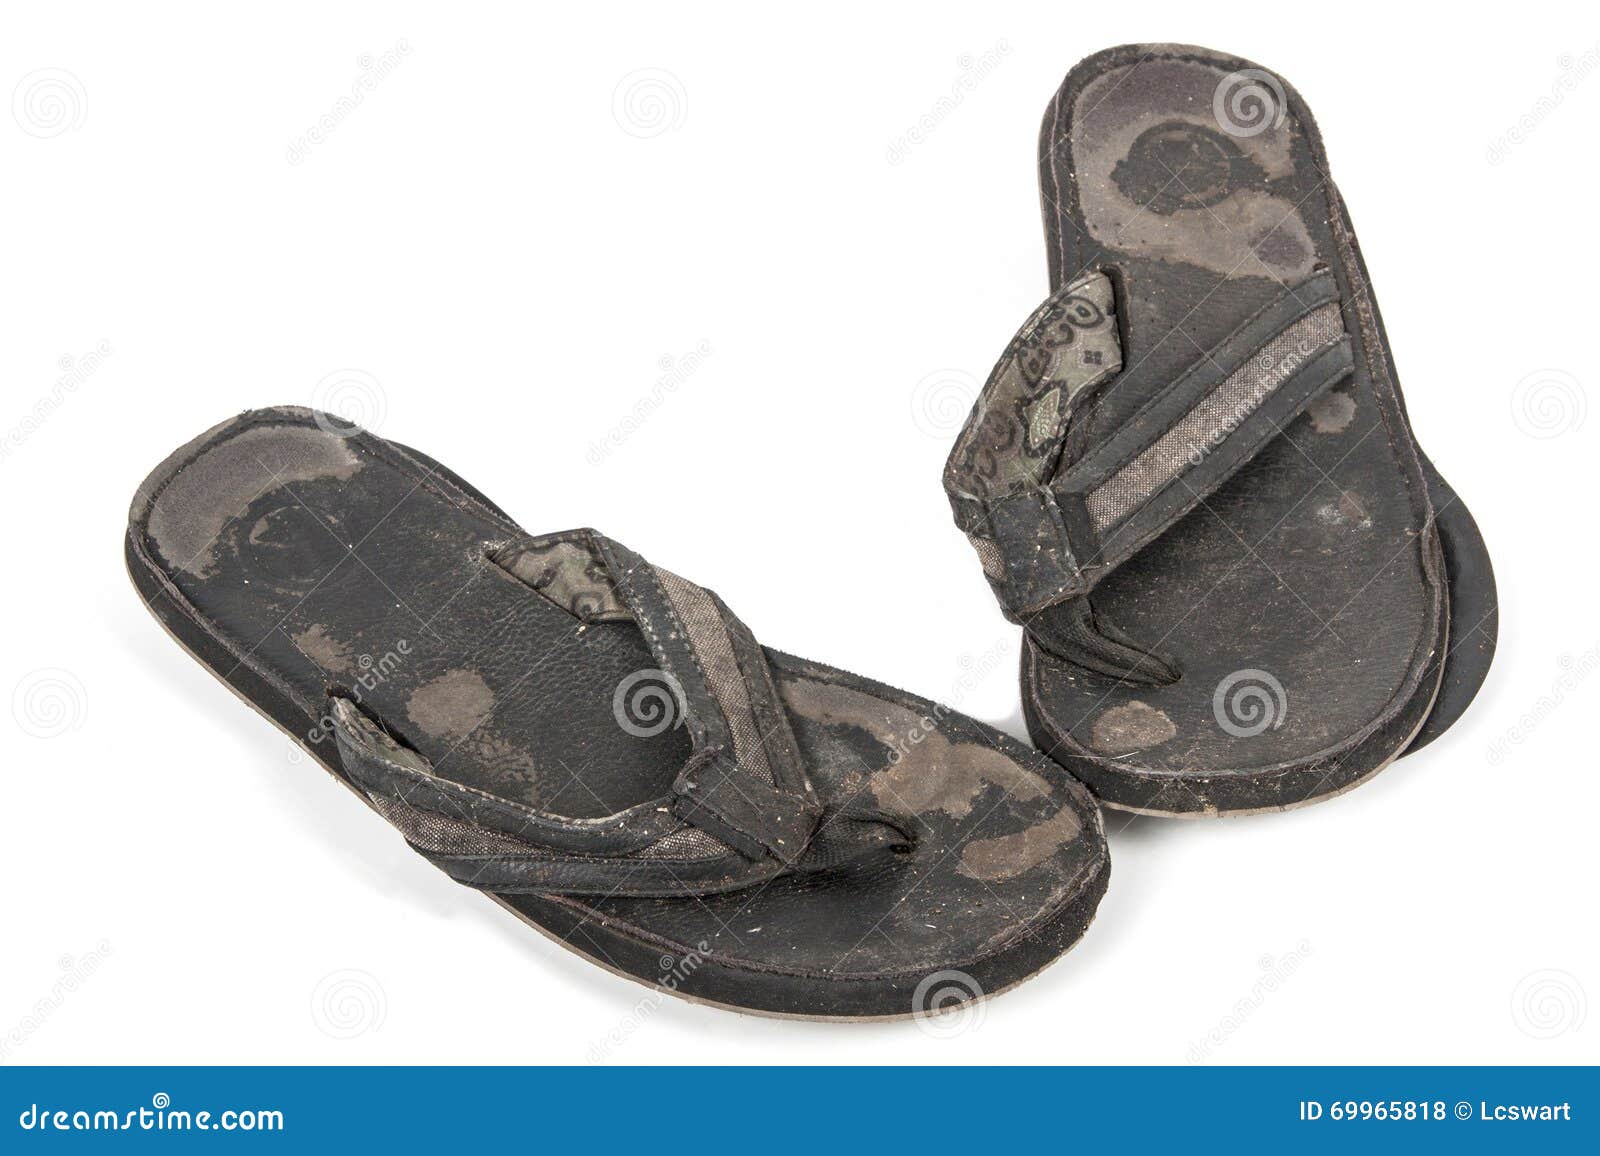 Weathered Pair of Worn-Out Black Leather Sandals Stock Photo - Image of ...